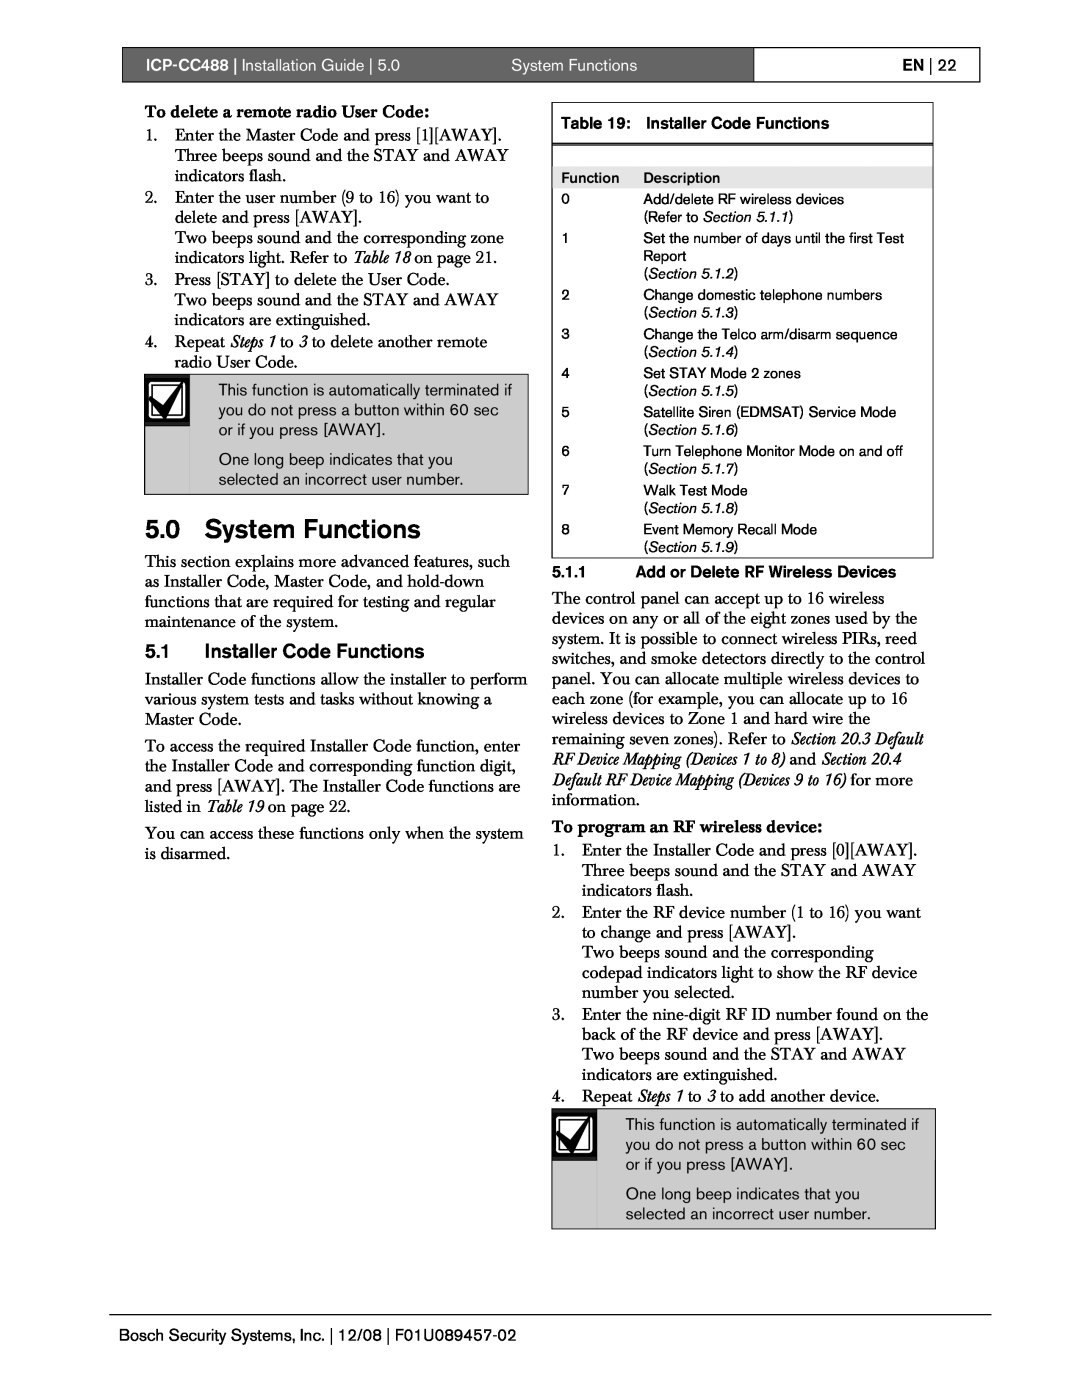 Bosch Appliances manual System Functions, 5.1Installer Code Functions, ICP-CC488| Installation Guide 